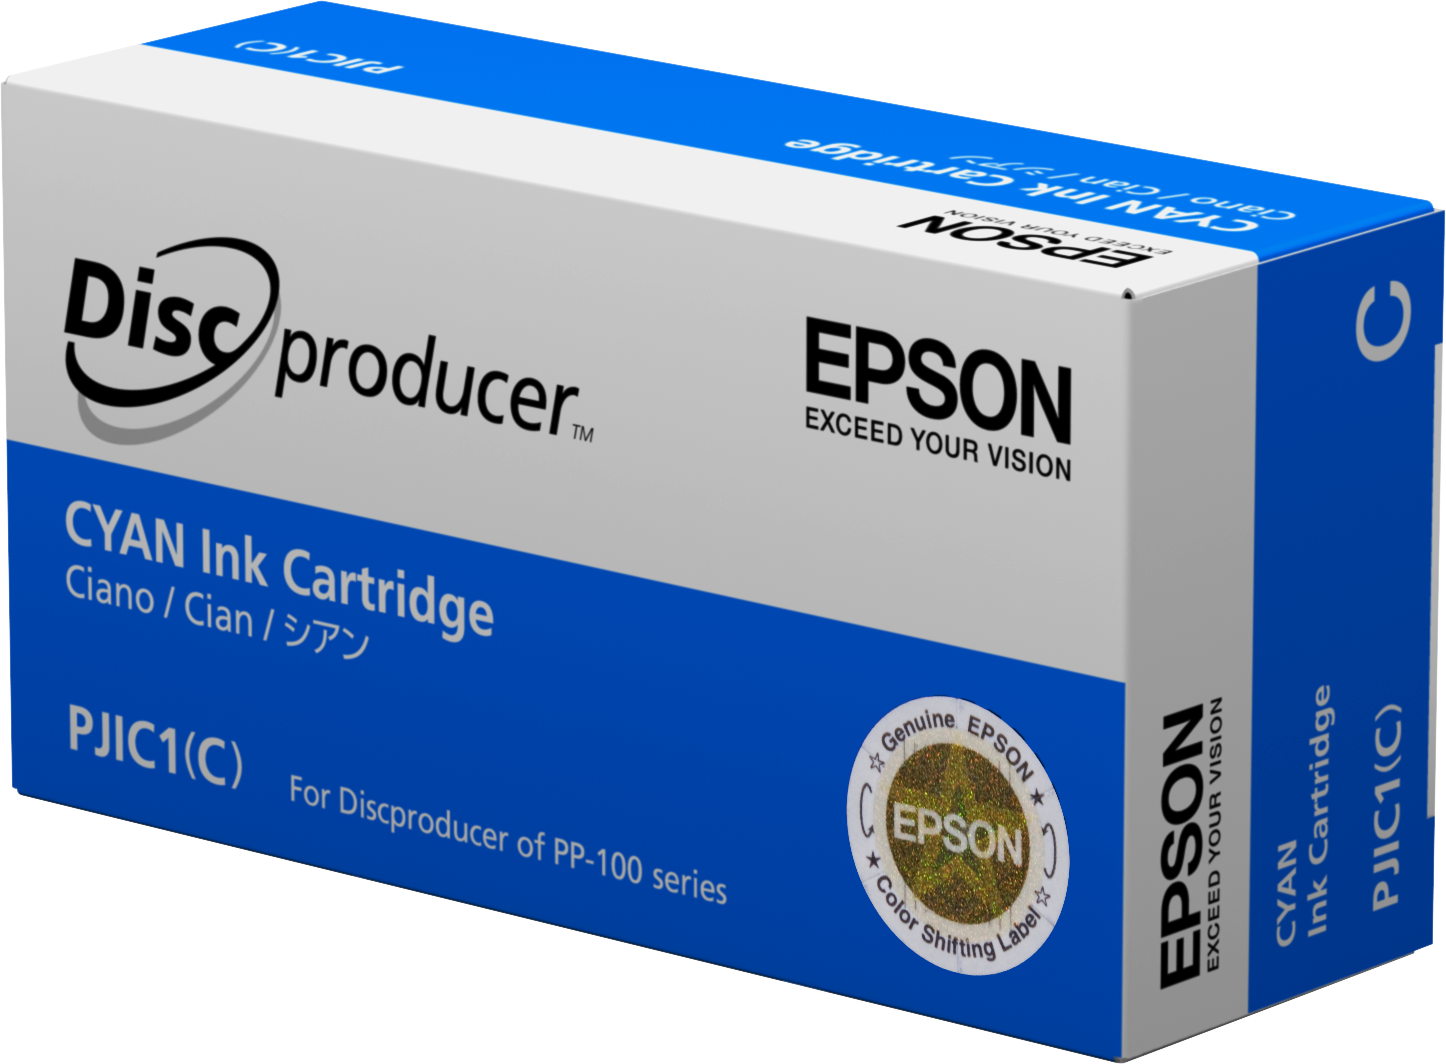 Epson Discproducer Ink PJIC7(C), Cyan (MOQ=10)